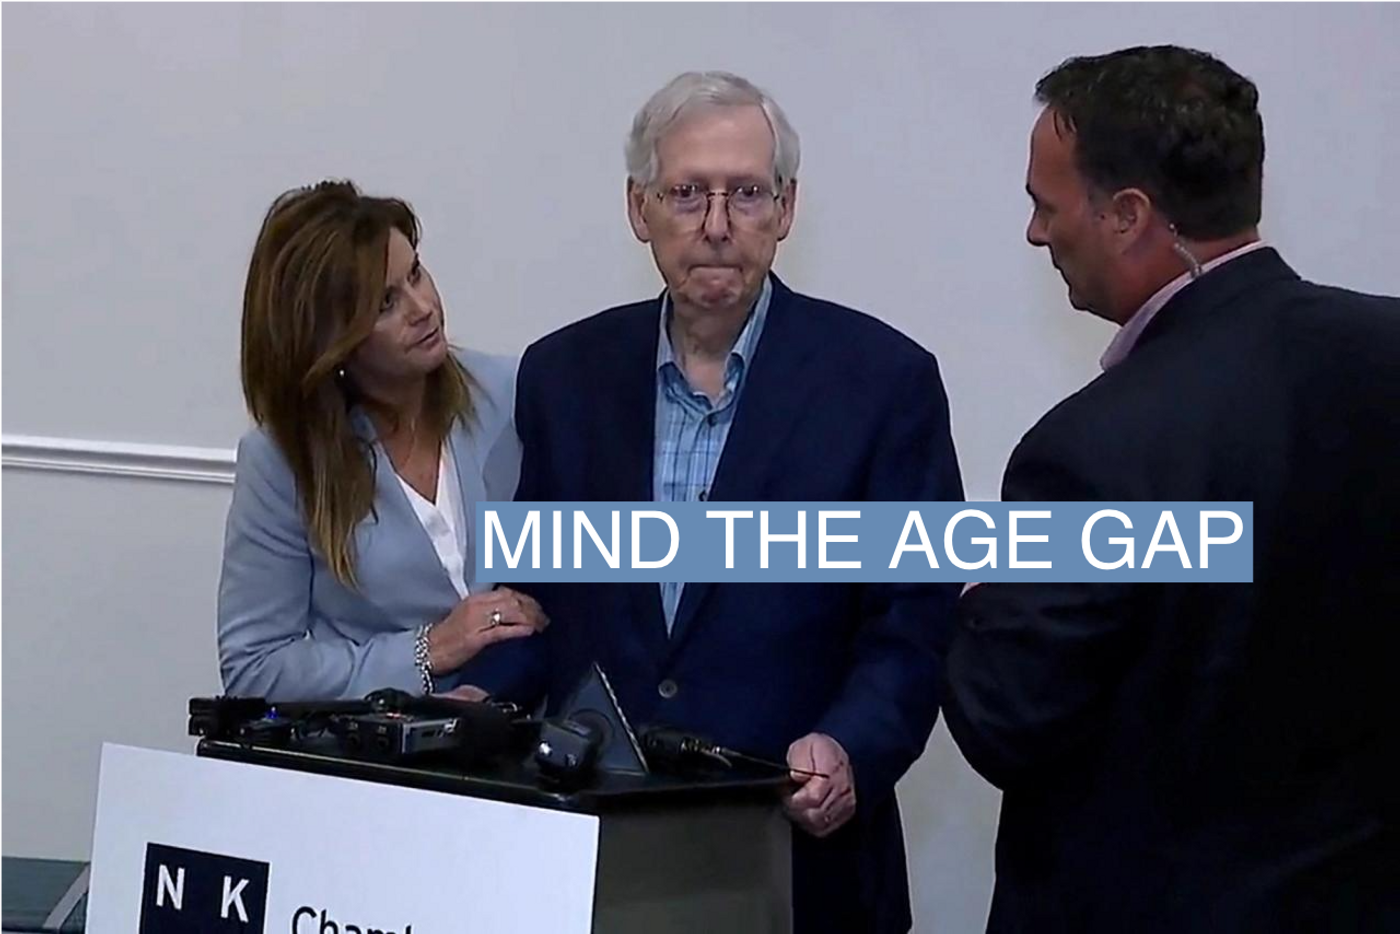 Top U.S. Senate Republican Mitch McConnell appears to freeze up for more than 30 seconds during a public appearance before he was escorted away on Wednesday.